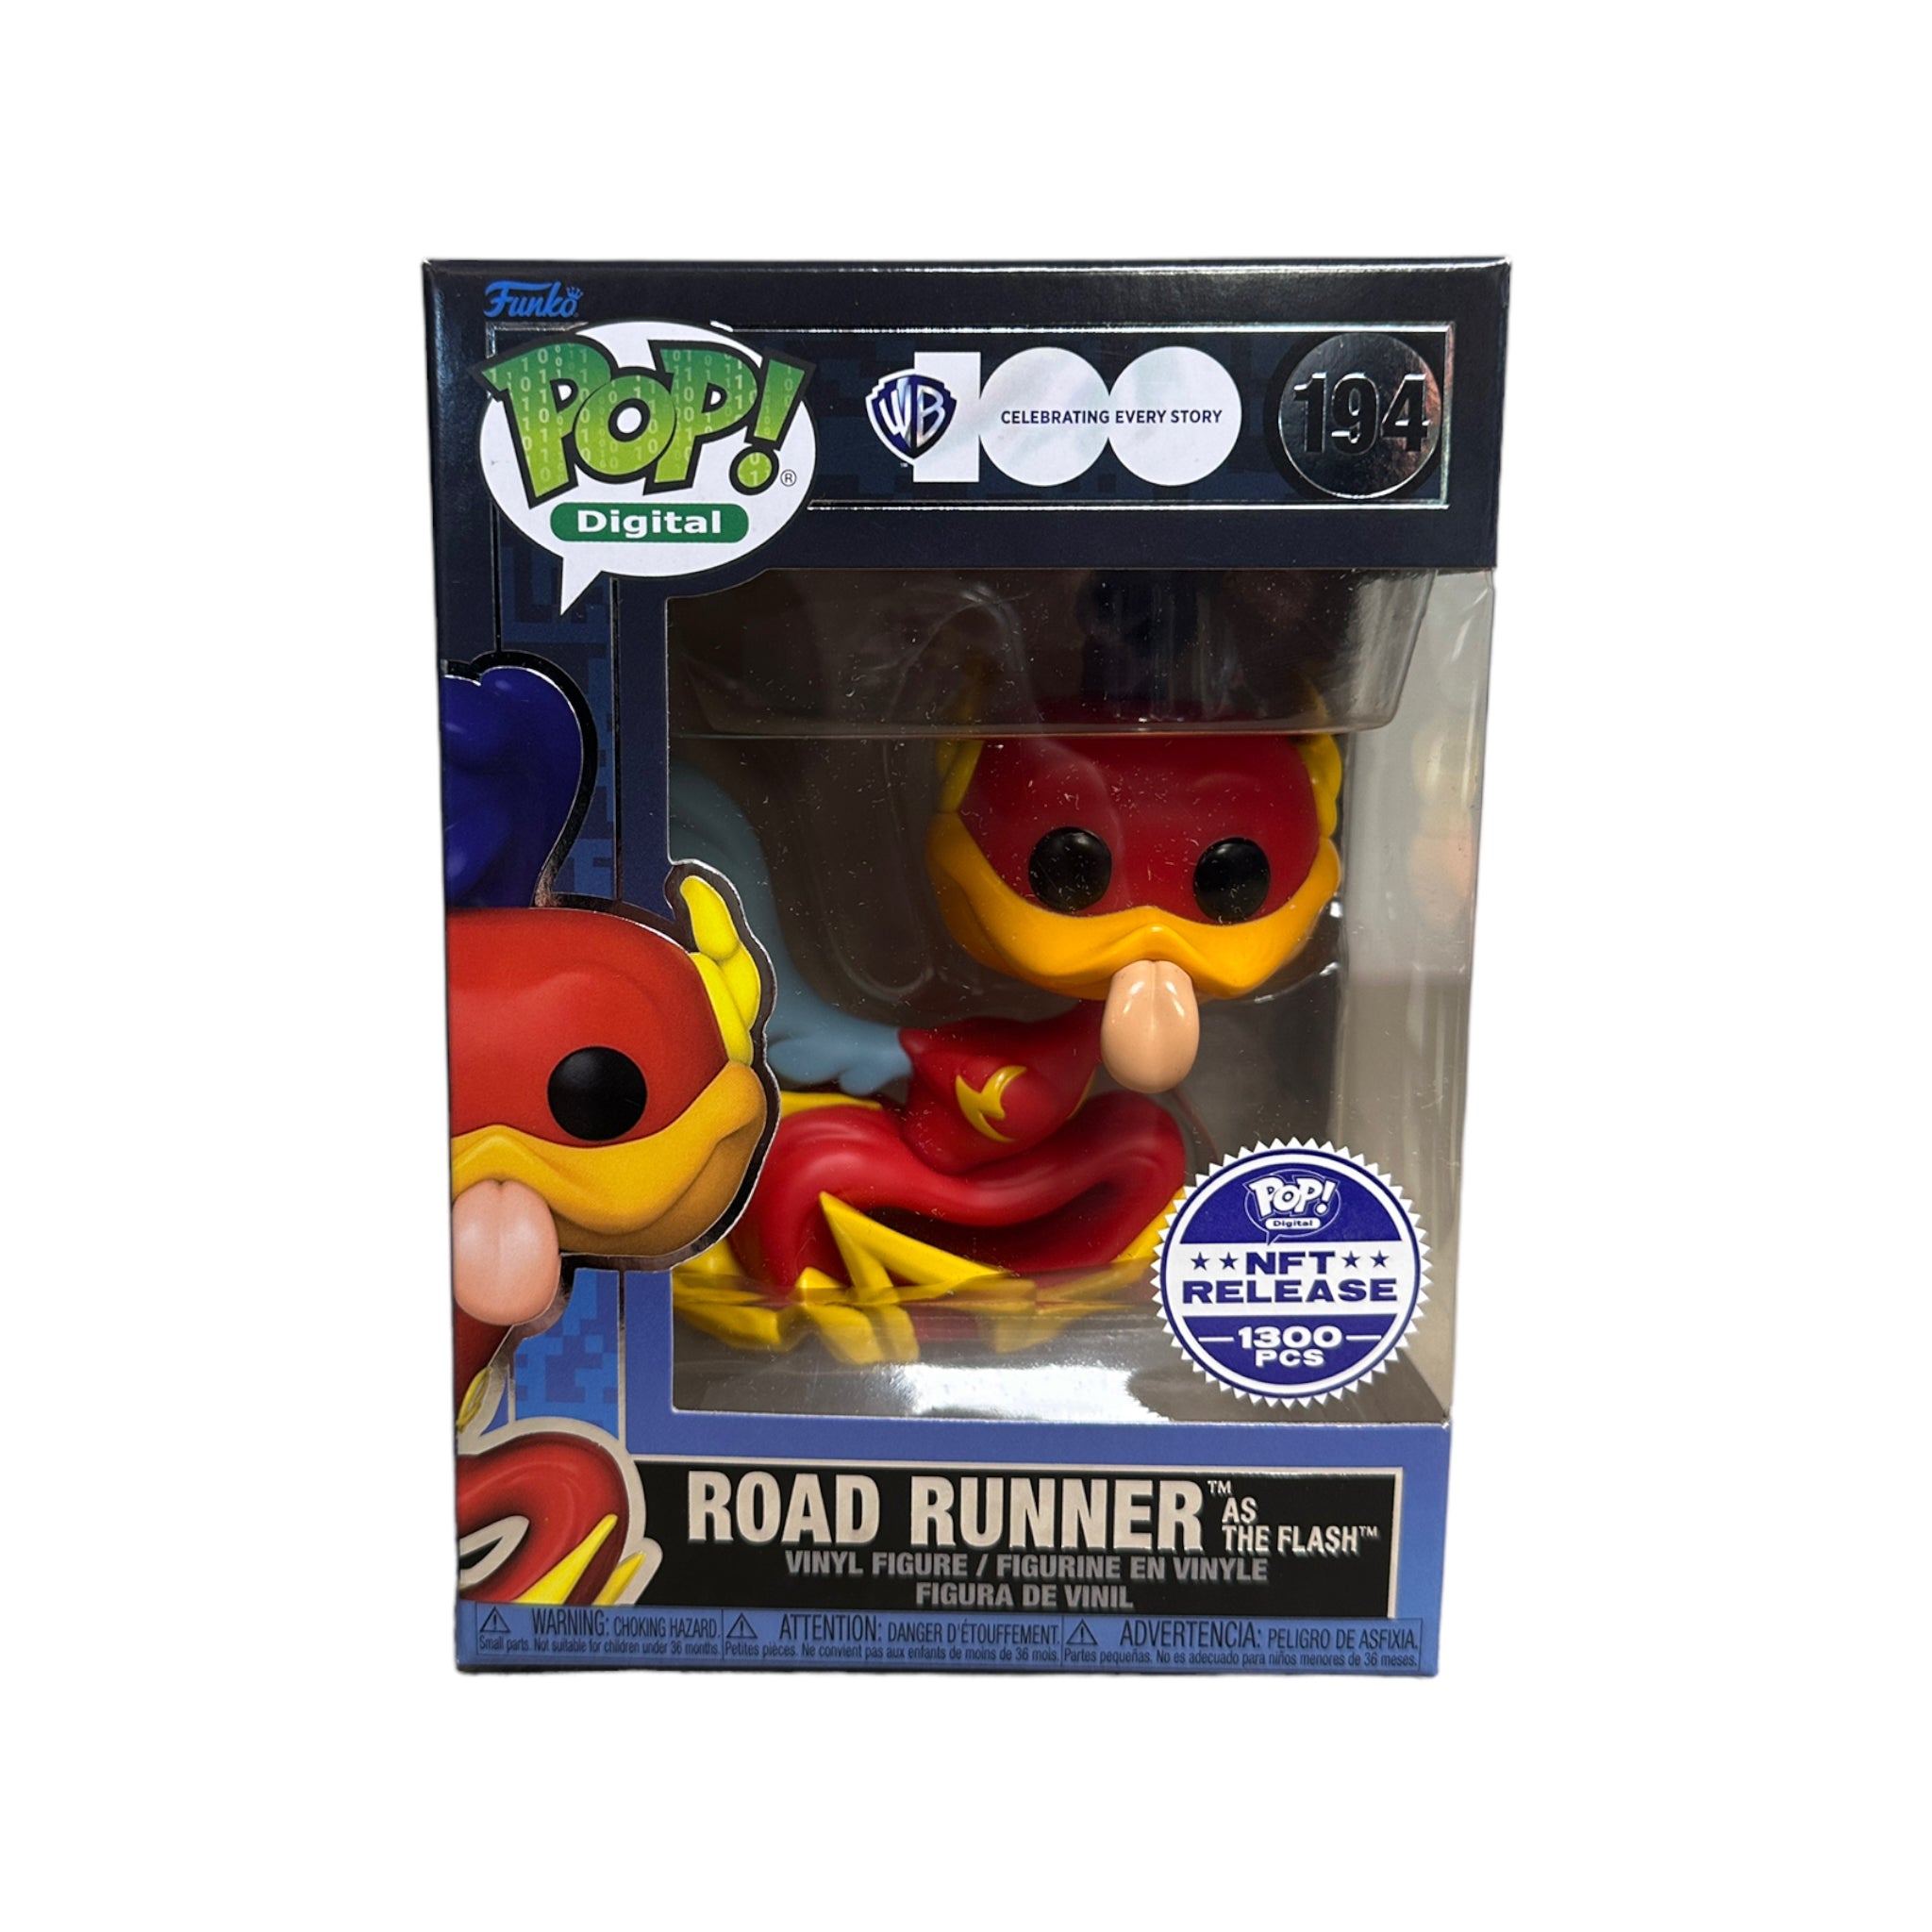 Road Runner as The Flash #194 Funko Pop! - WB 100 - NFT Release Exclusive LE1300 Pcs - Condition 9.5/10